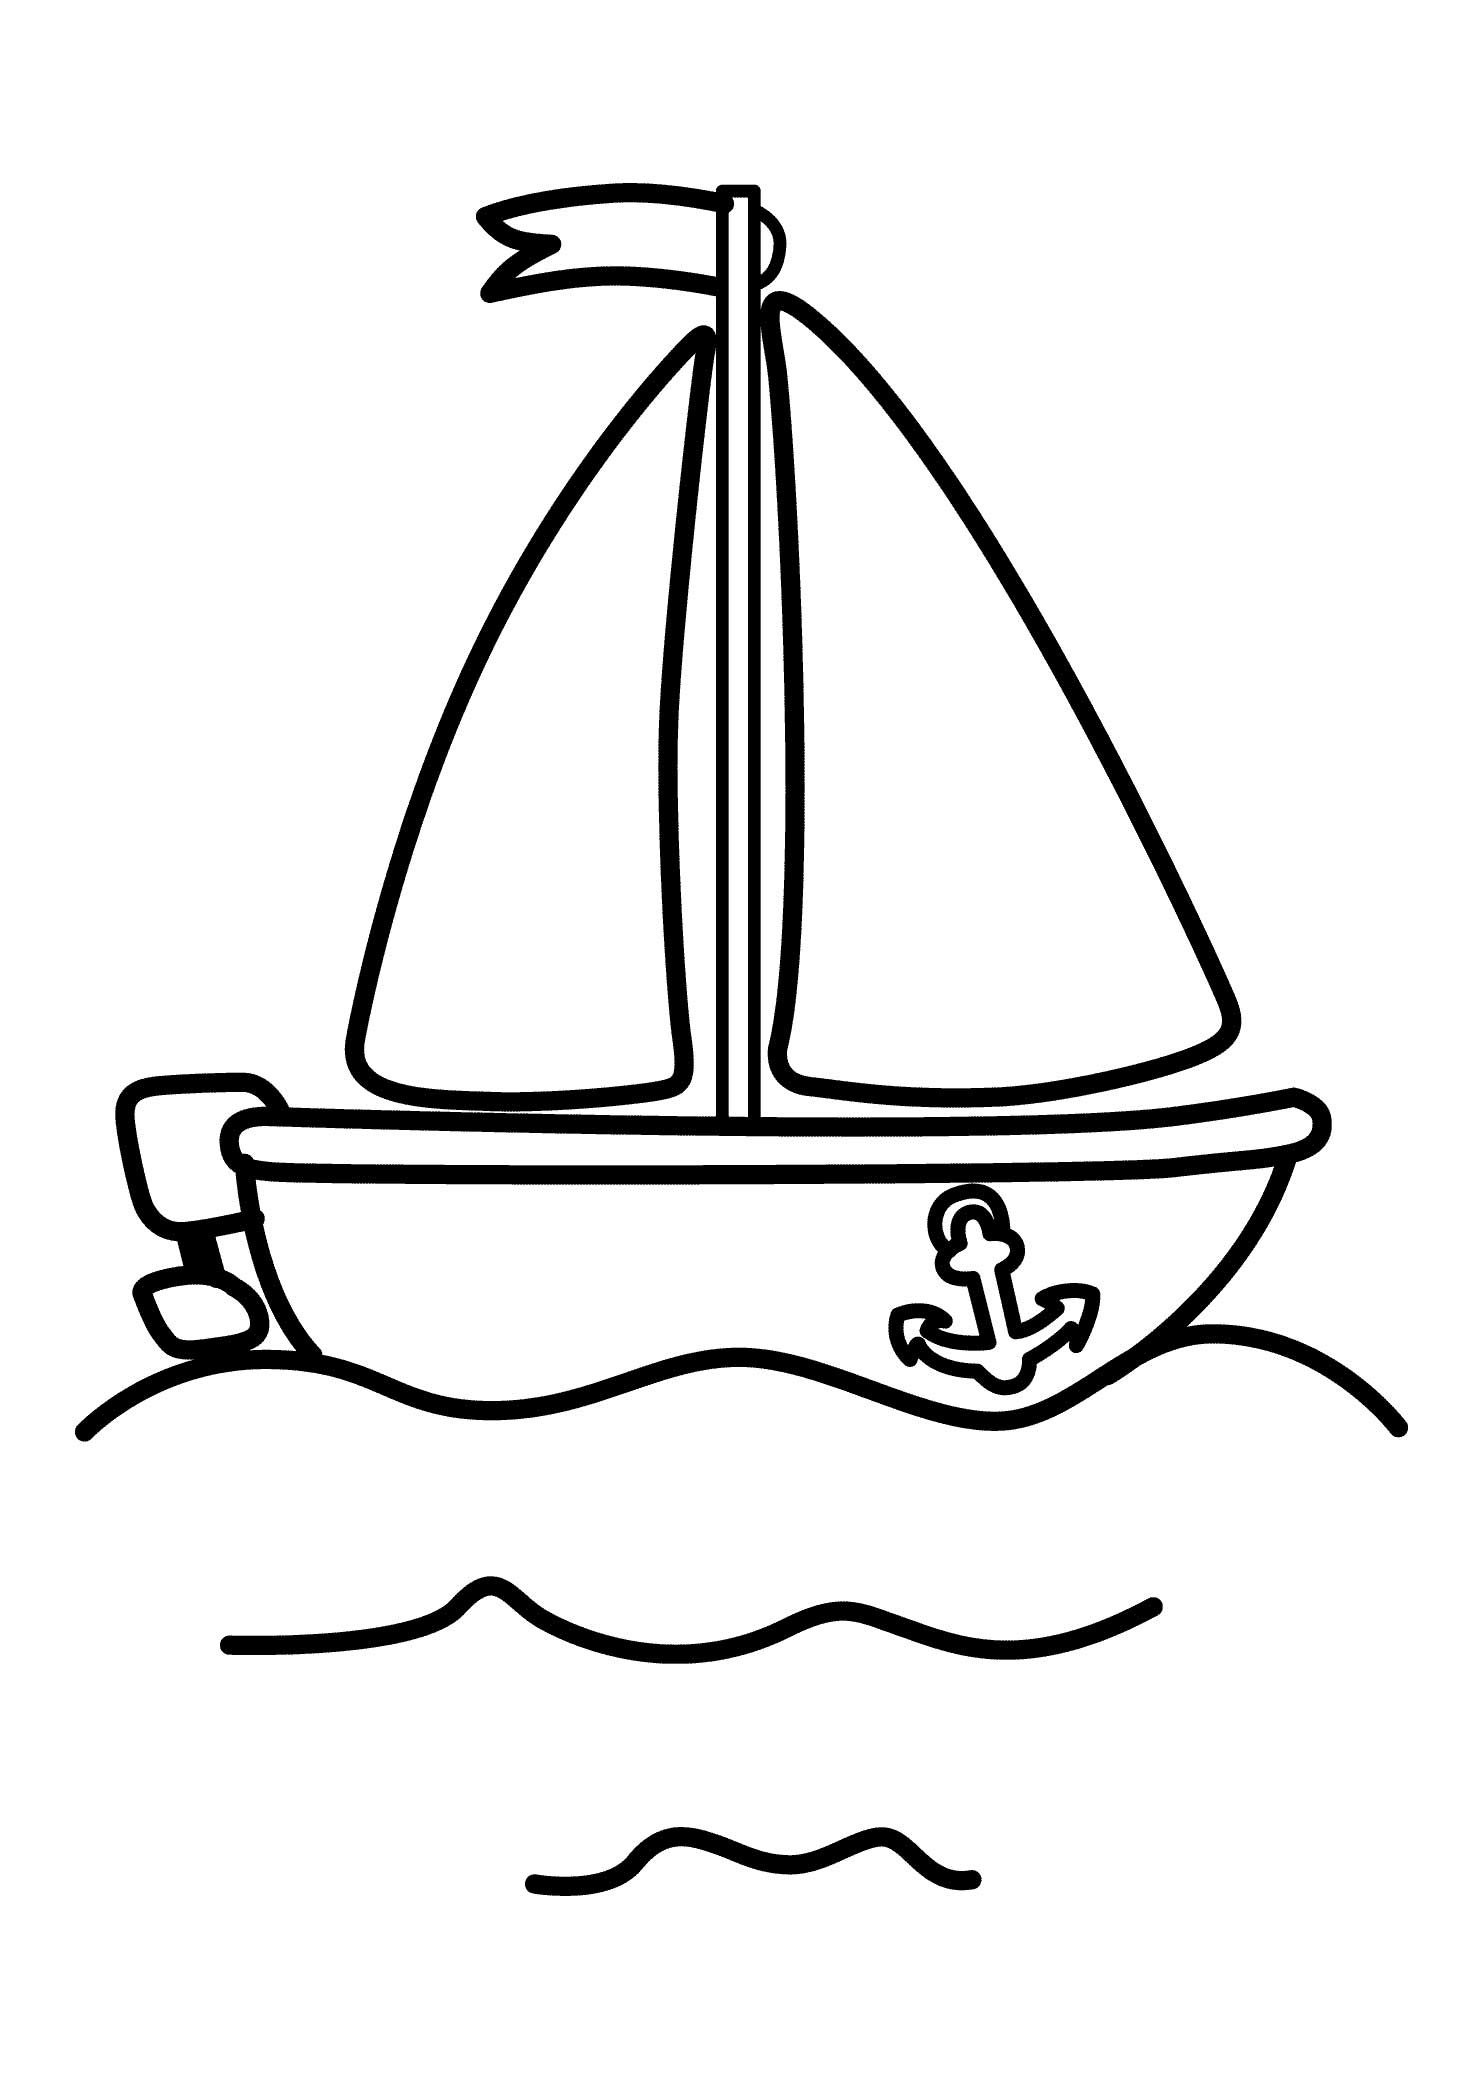 Pinshreya Thakur On Free Coloring Pages | Pinterest | Coloring - Free Printable Boat Pictures